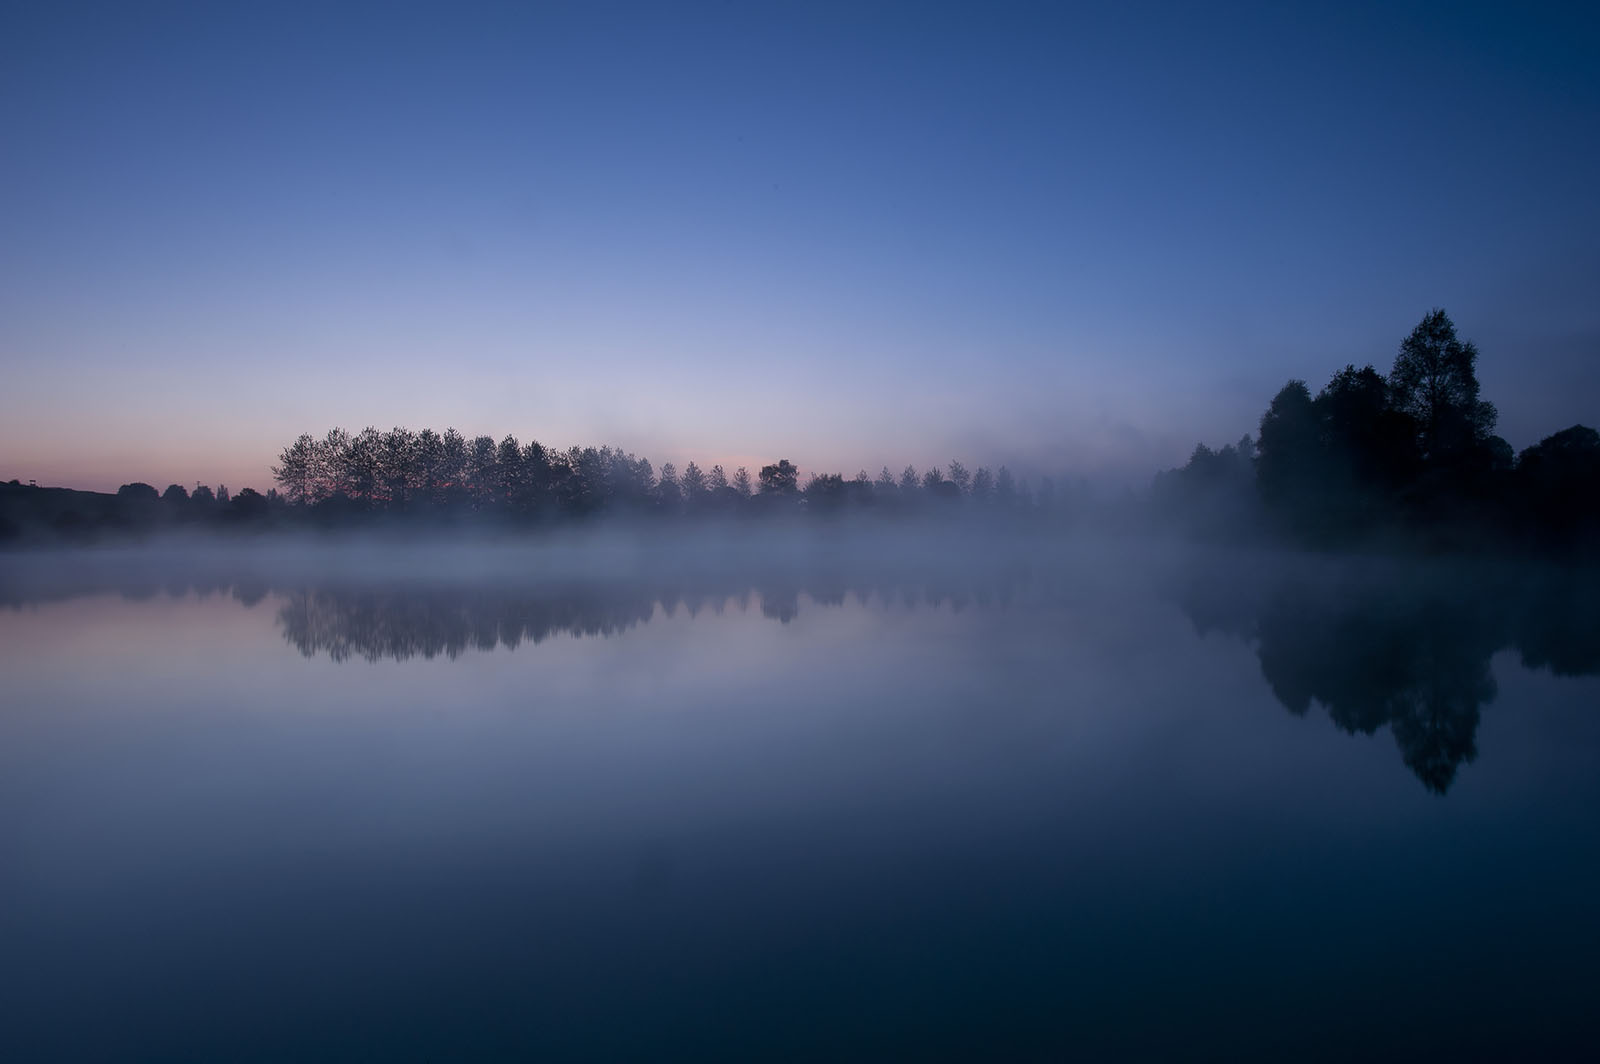 Modern photograph of morning mist rising off a glass-like water surface with trees in the background.